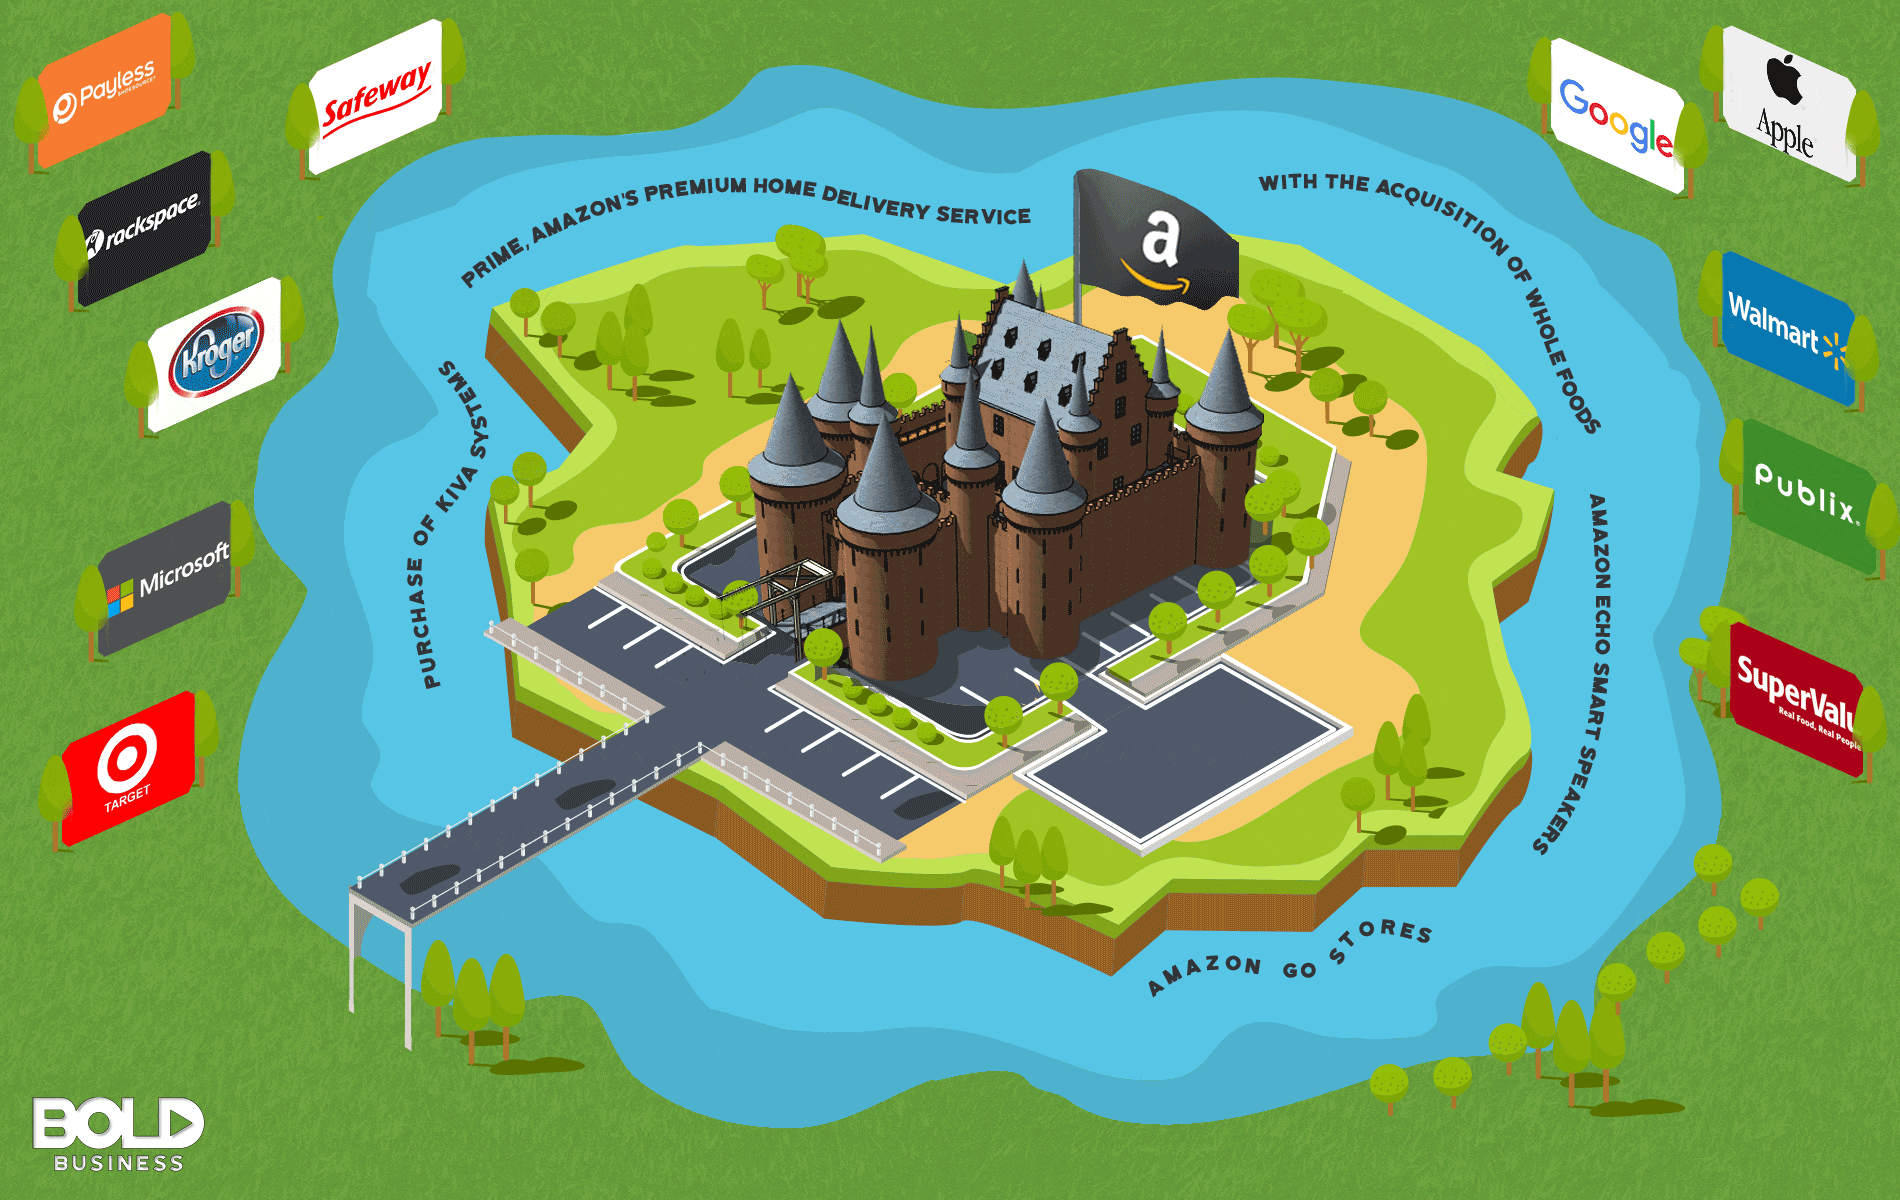 An Illustration of Amazon moat surrounding their business.